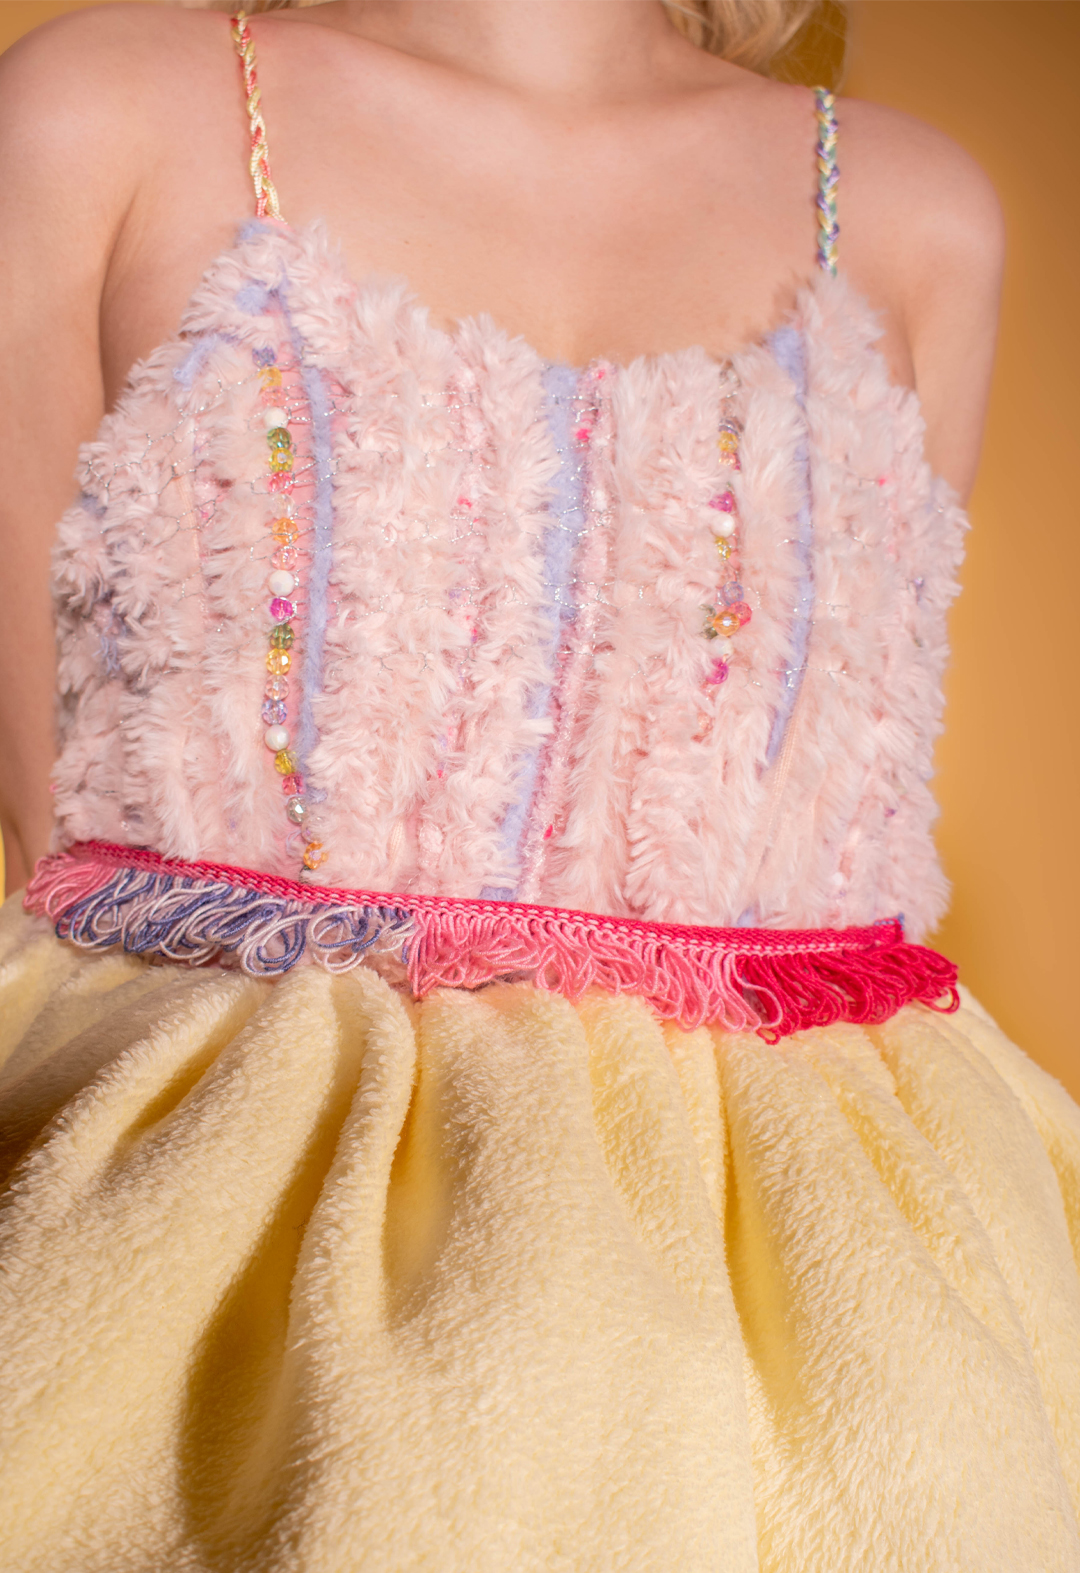 Photo of the detail of the bodice and belt of the garment. The stripes are braided into colorful stripes. The fabric of the bodice is a weaving manipulation with pink-and-blue furry yarns and colorful beading. The belt is knitted in pink yarns with tassels.